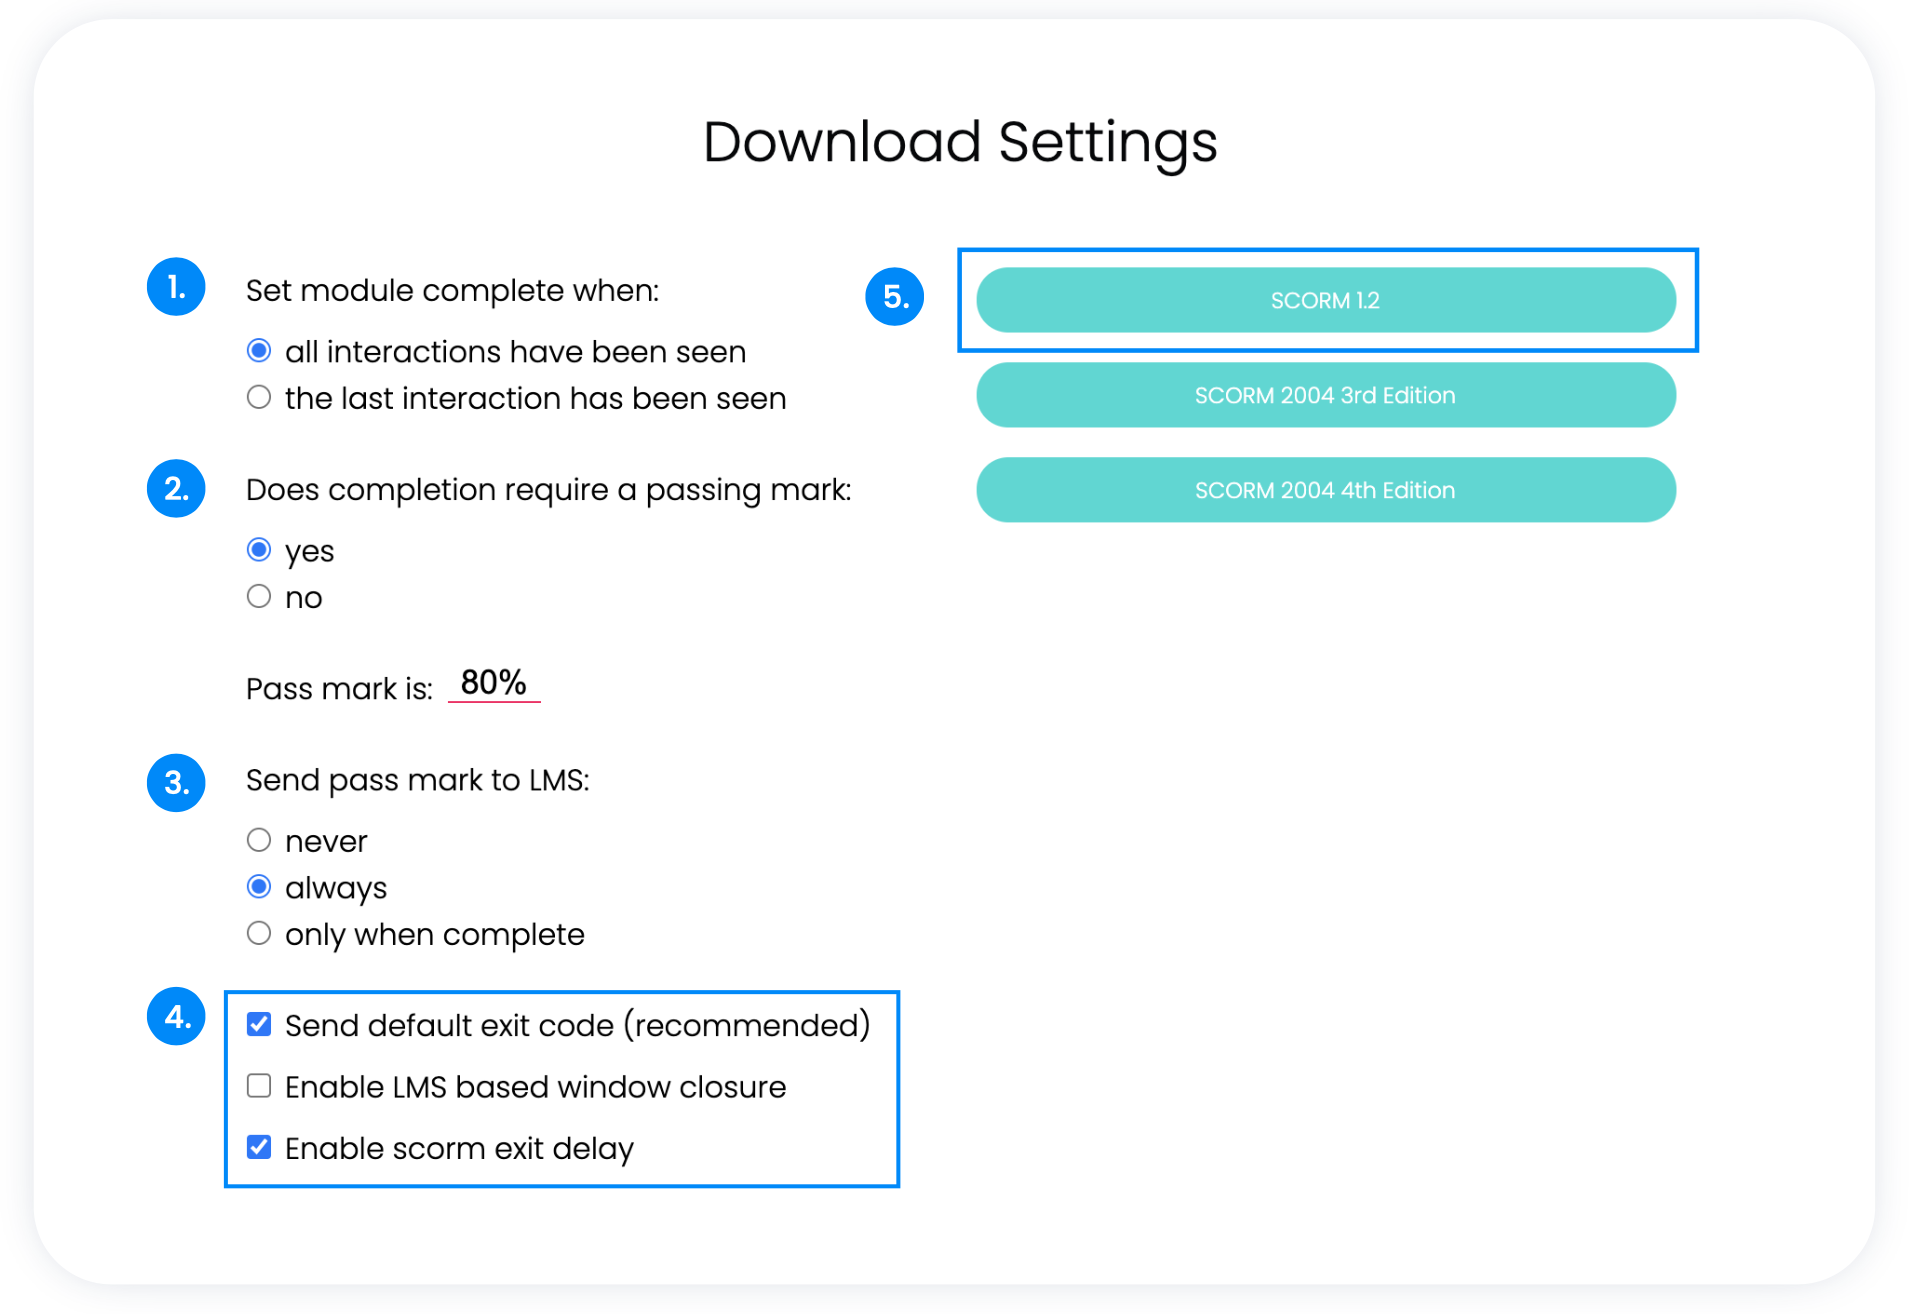 ANZ Download Settings Chameleon